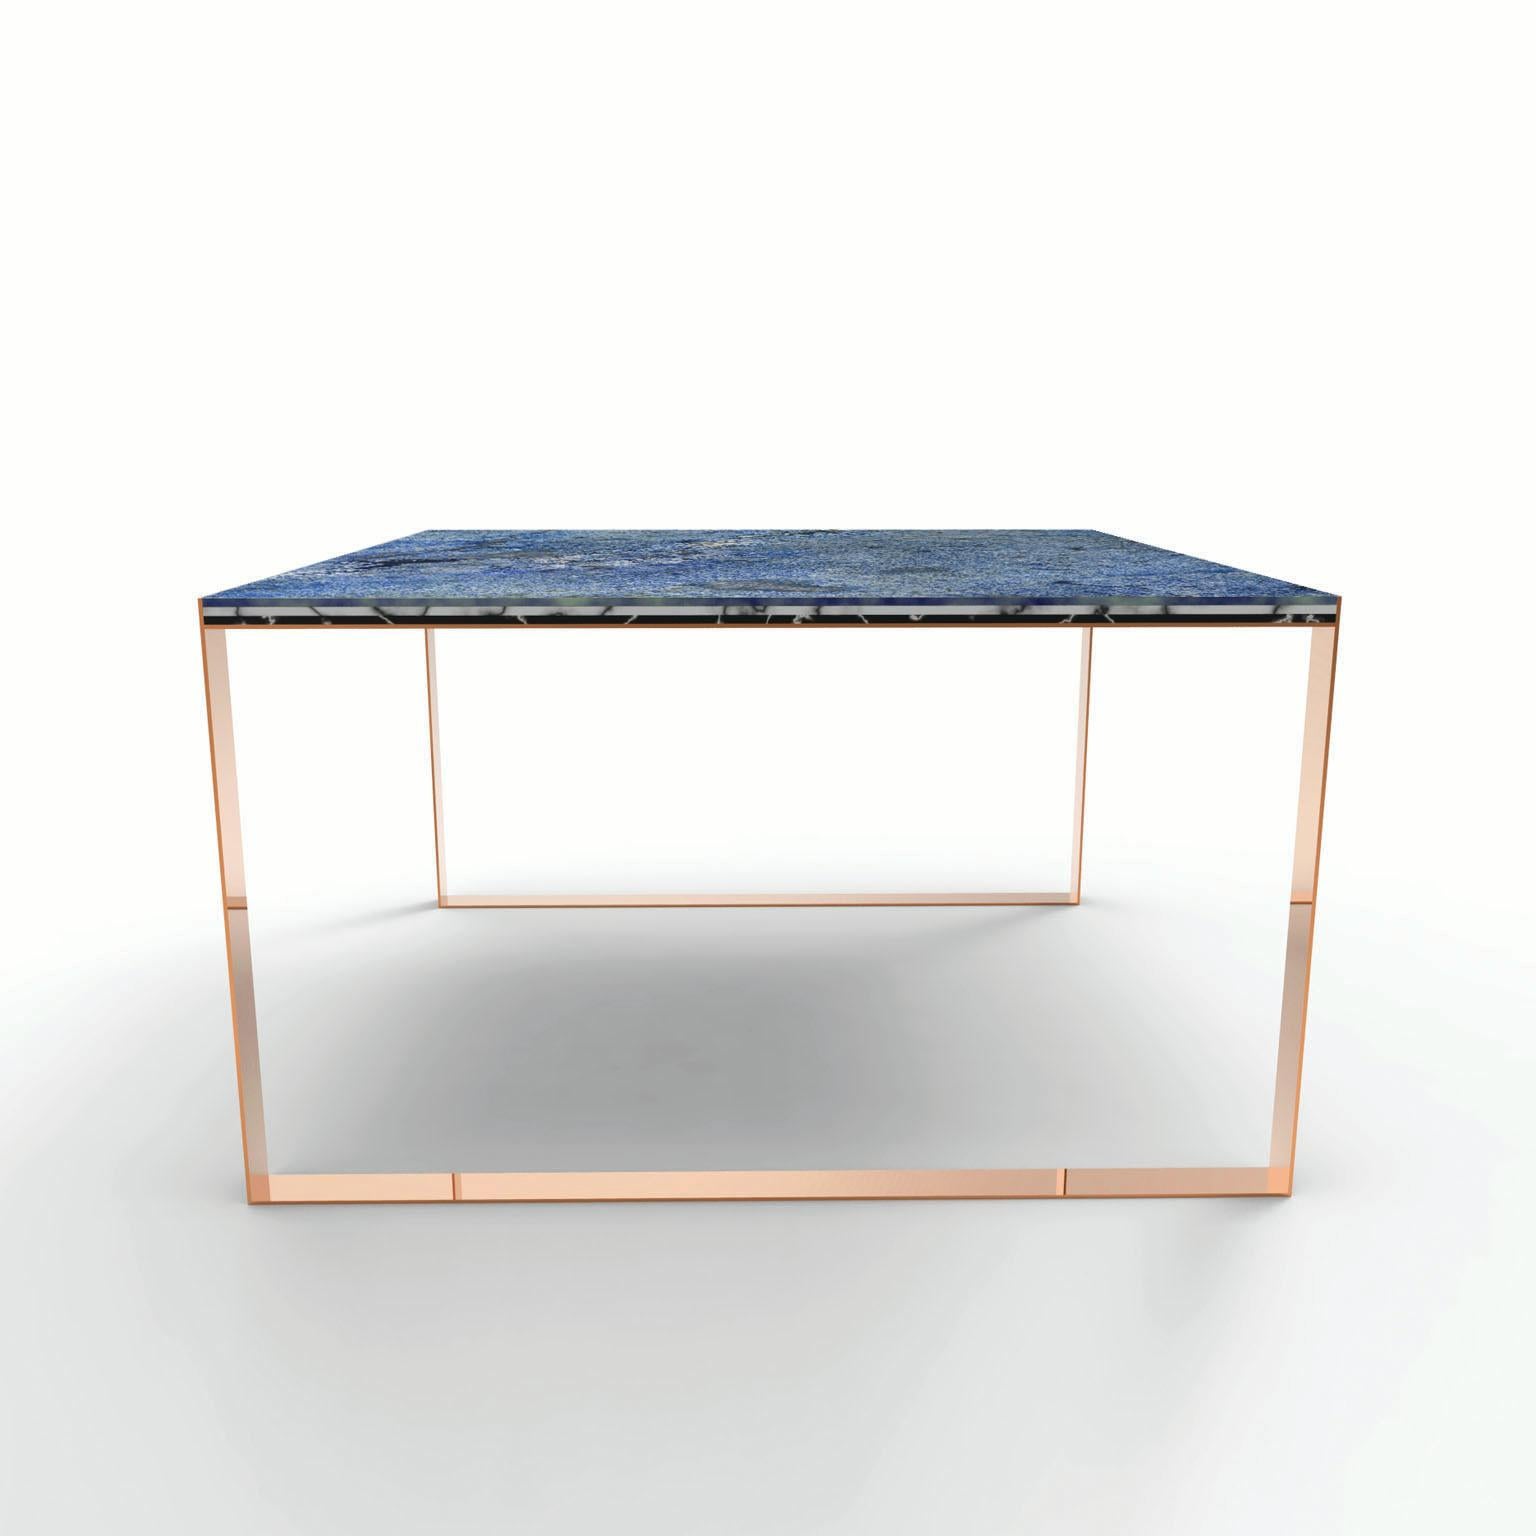 The “MARBELLOUS” dining table is square shaped table with a simple copper structure and a three layered marble top. Three different sheets of marble - black (Nero Marquina), white (Bianco Carrara) and blue (Azul Baia) - that provide the customer the